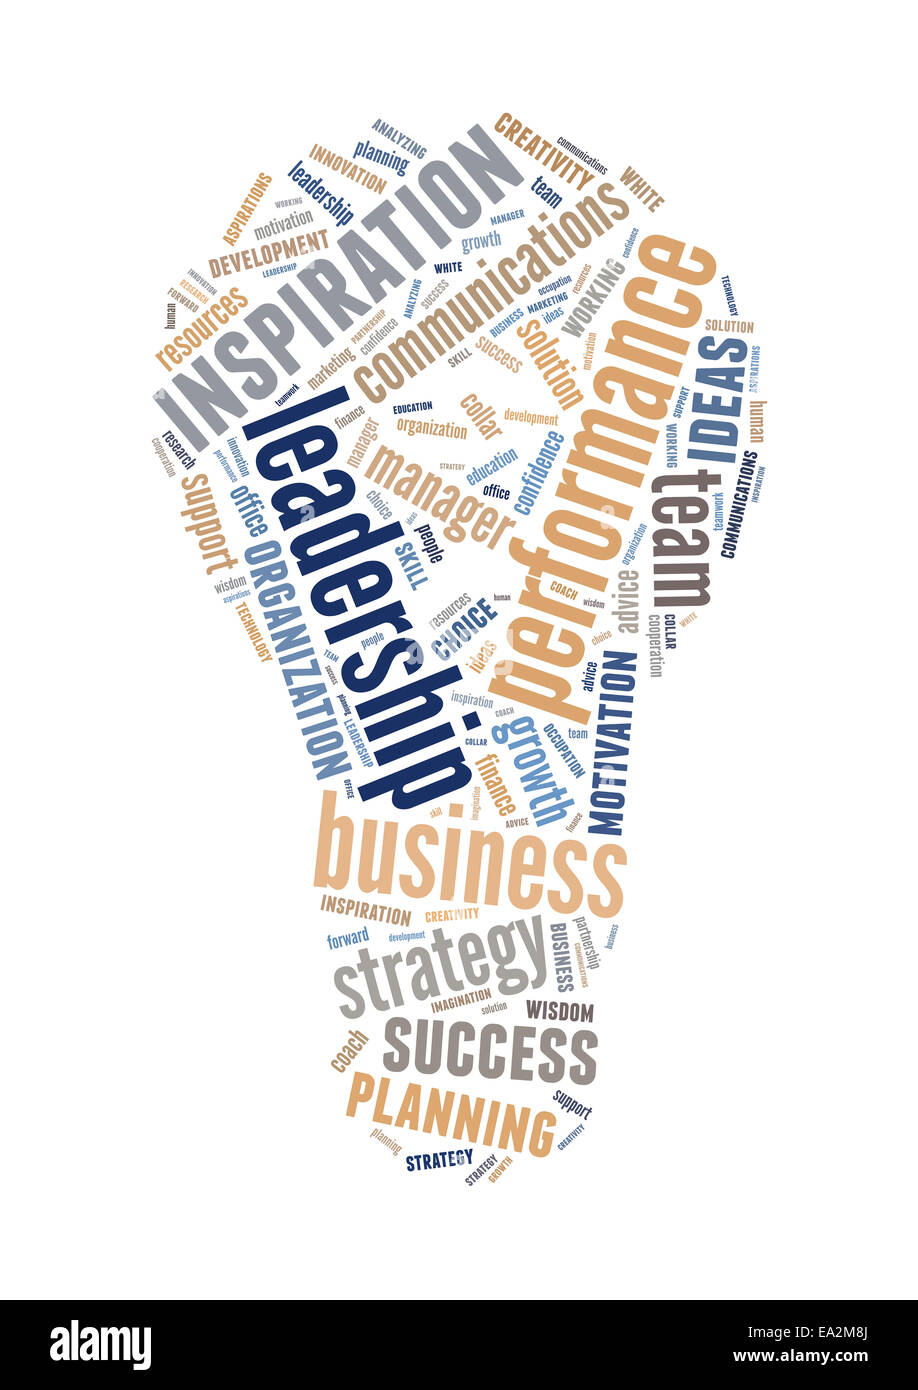 creative innovate business word cloud Stock Photo